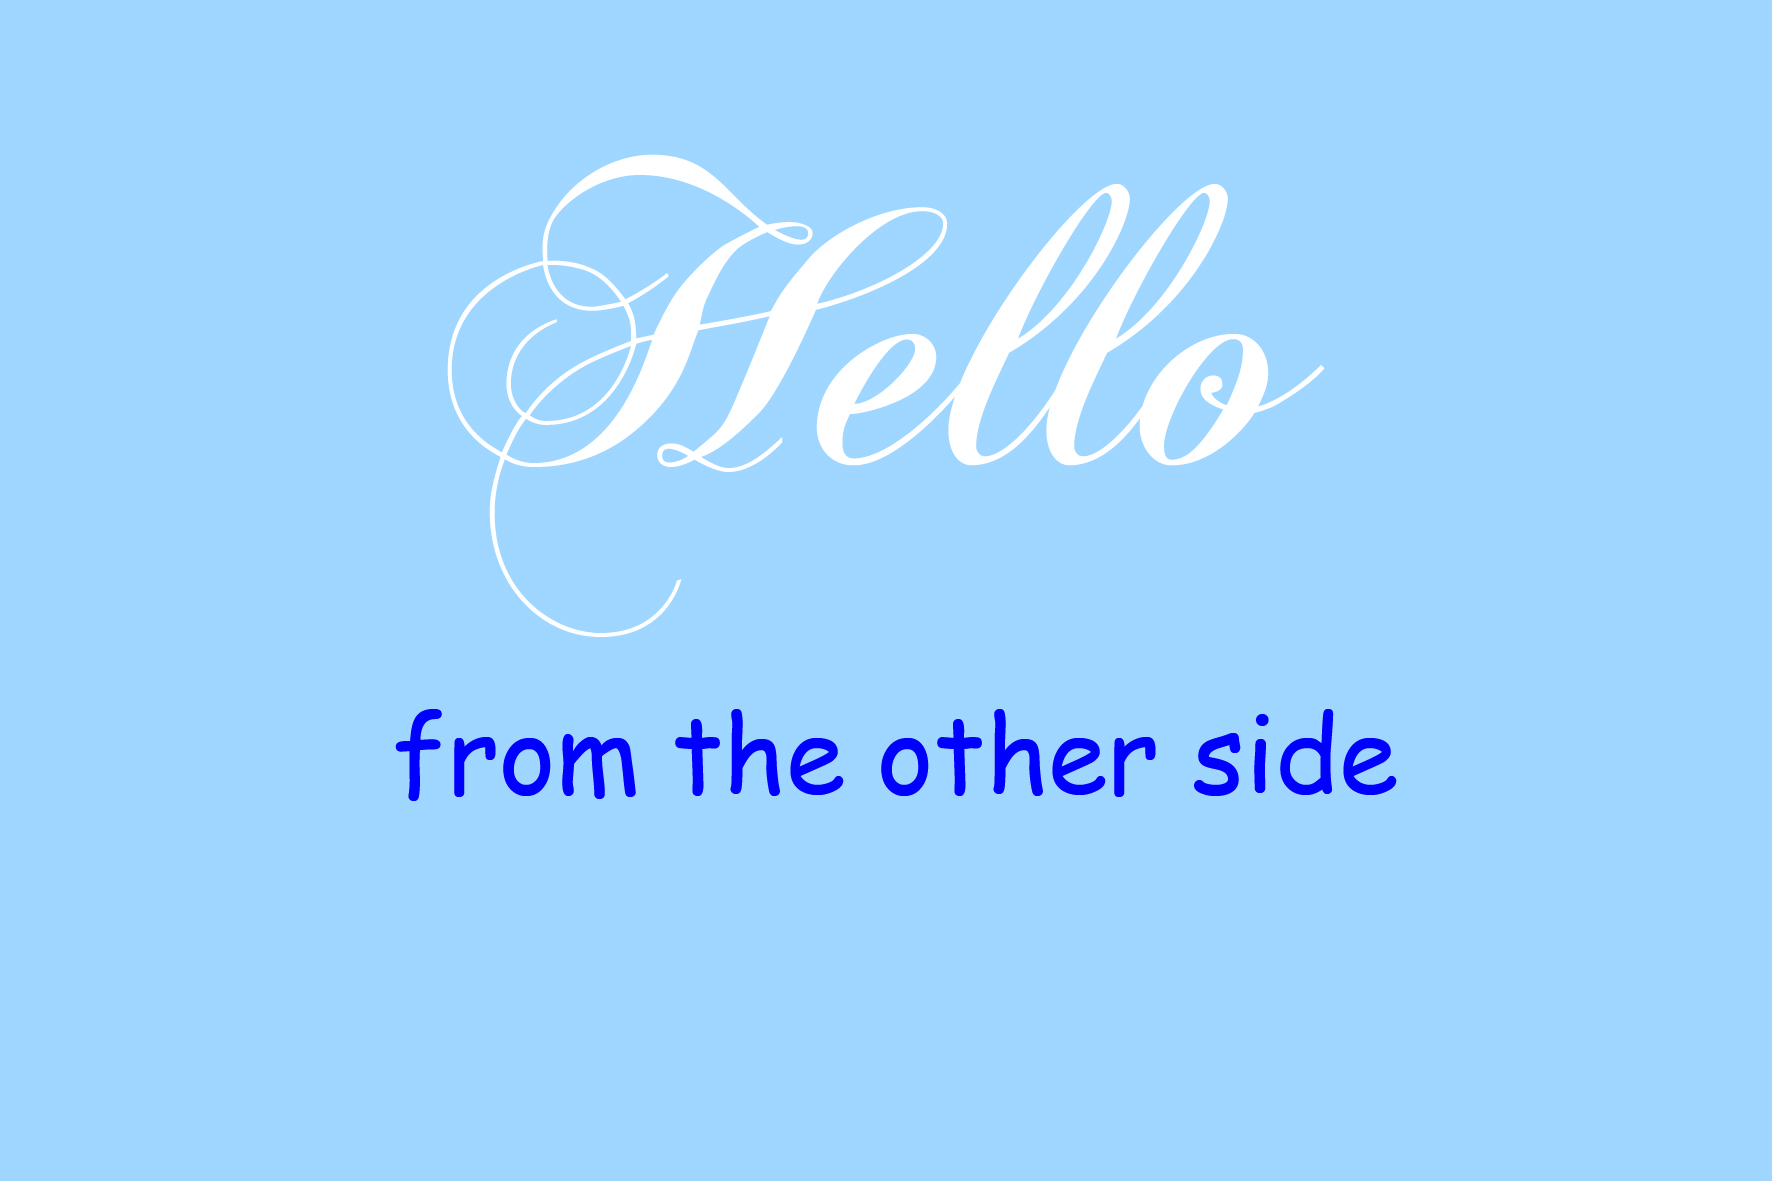 Hello from the other side …